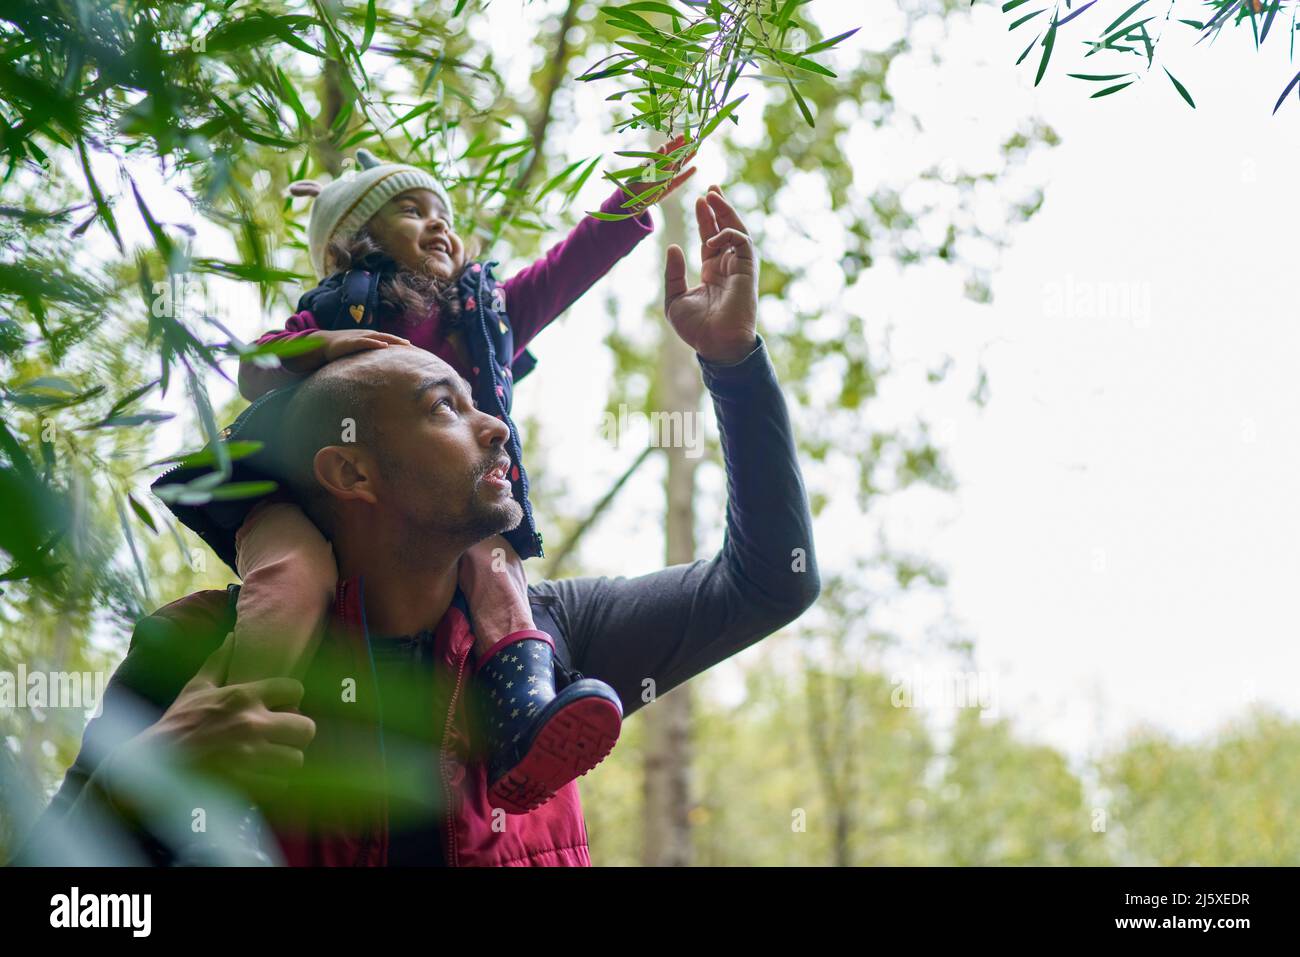 Daughter on shoulders of father reaching for branch on hike Stock Photo